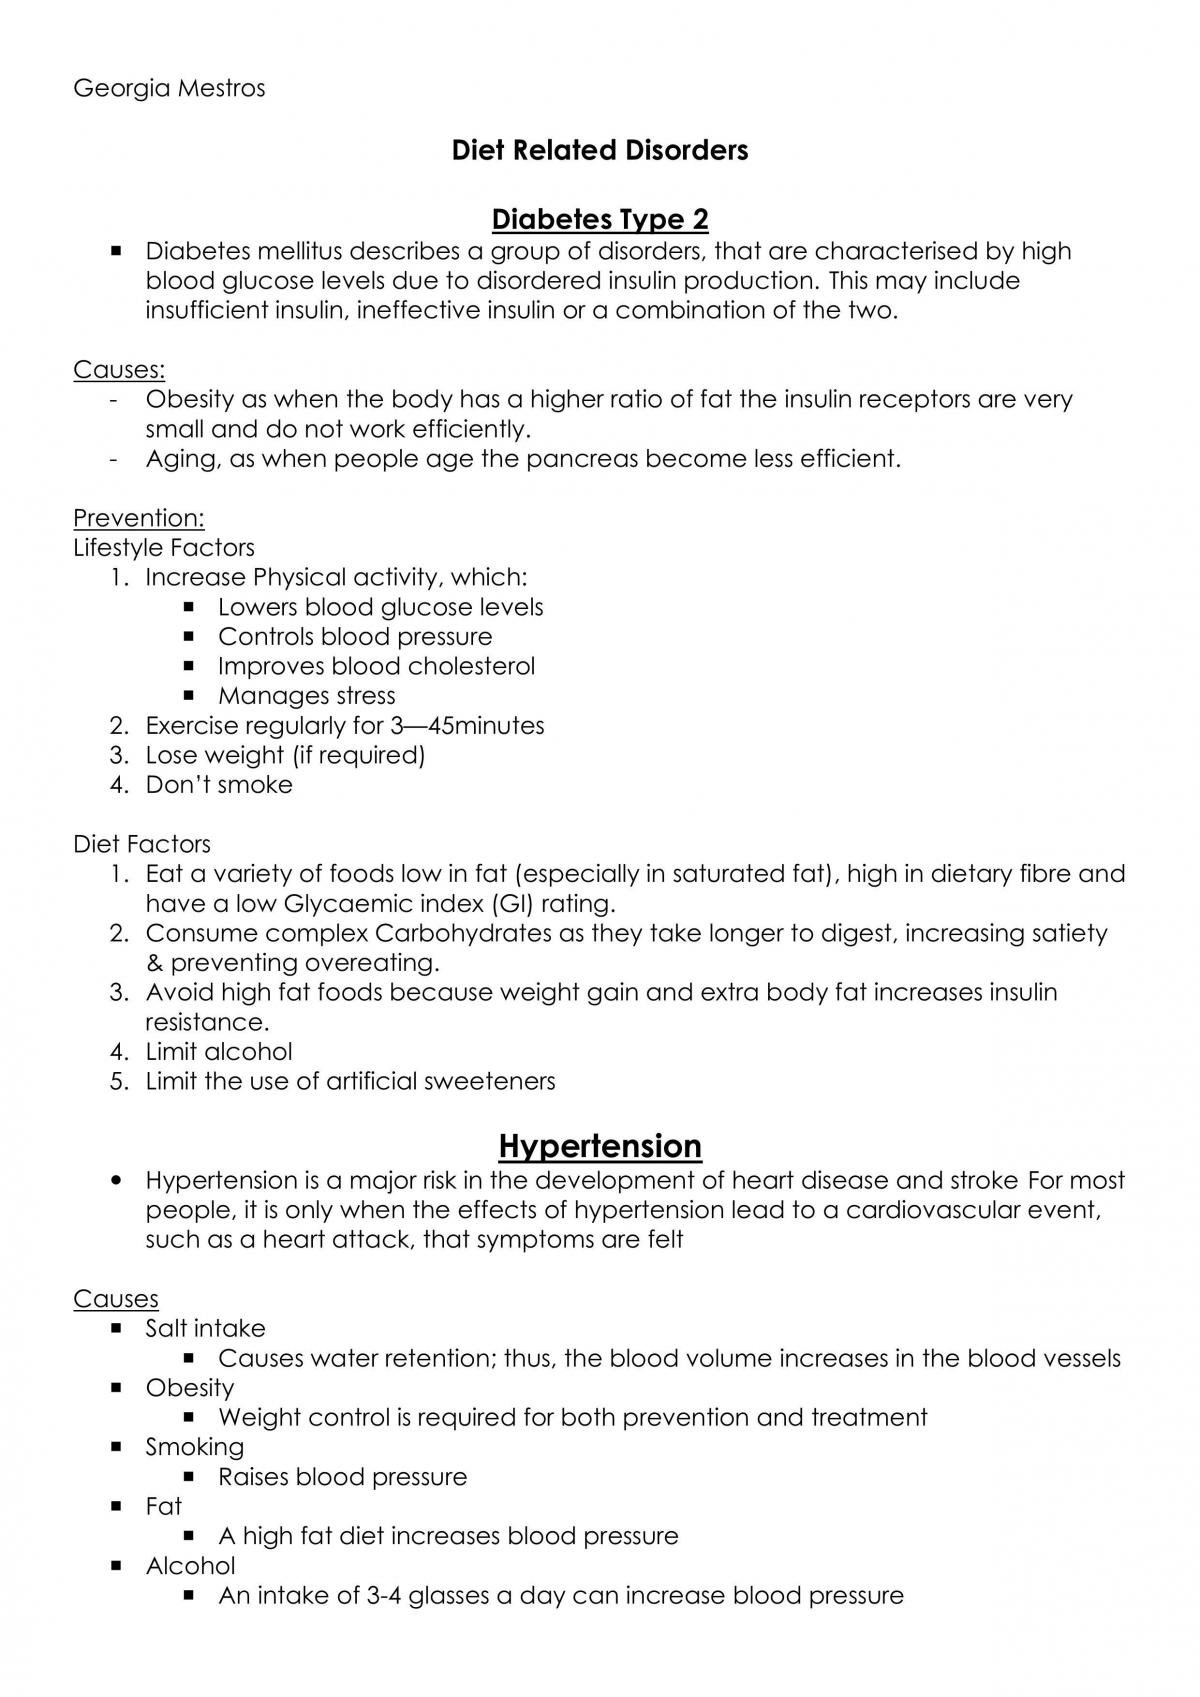 Diet Related Disorder Notes - Page 1